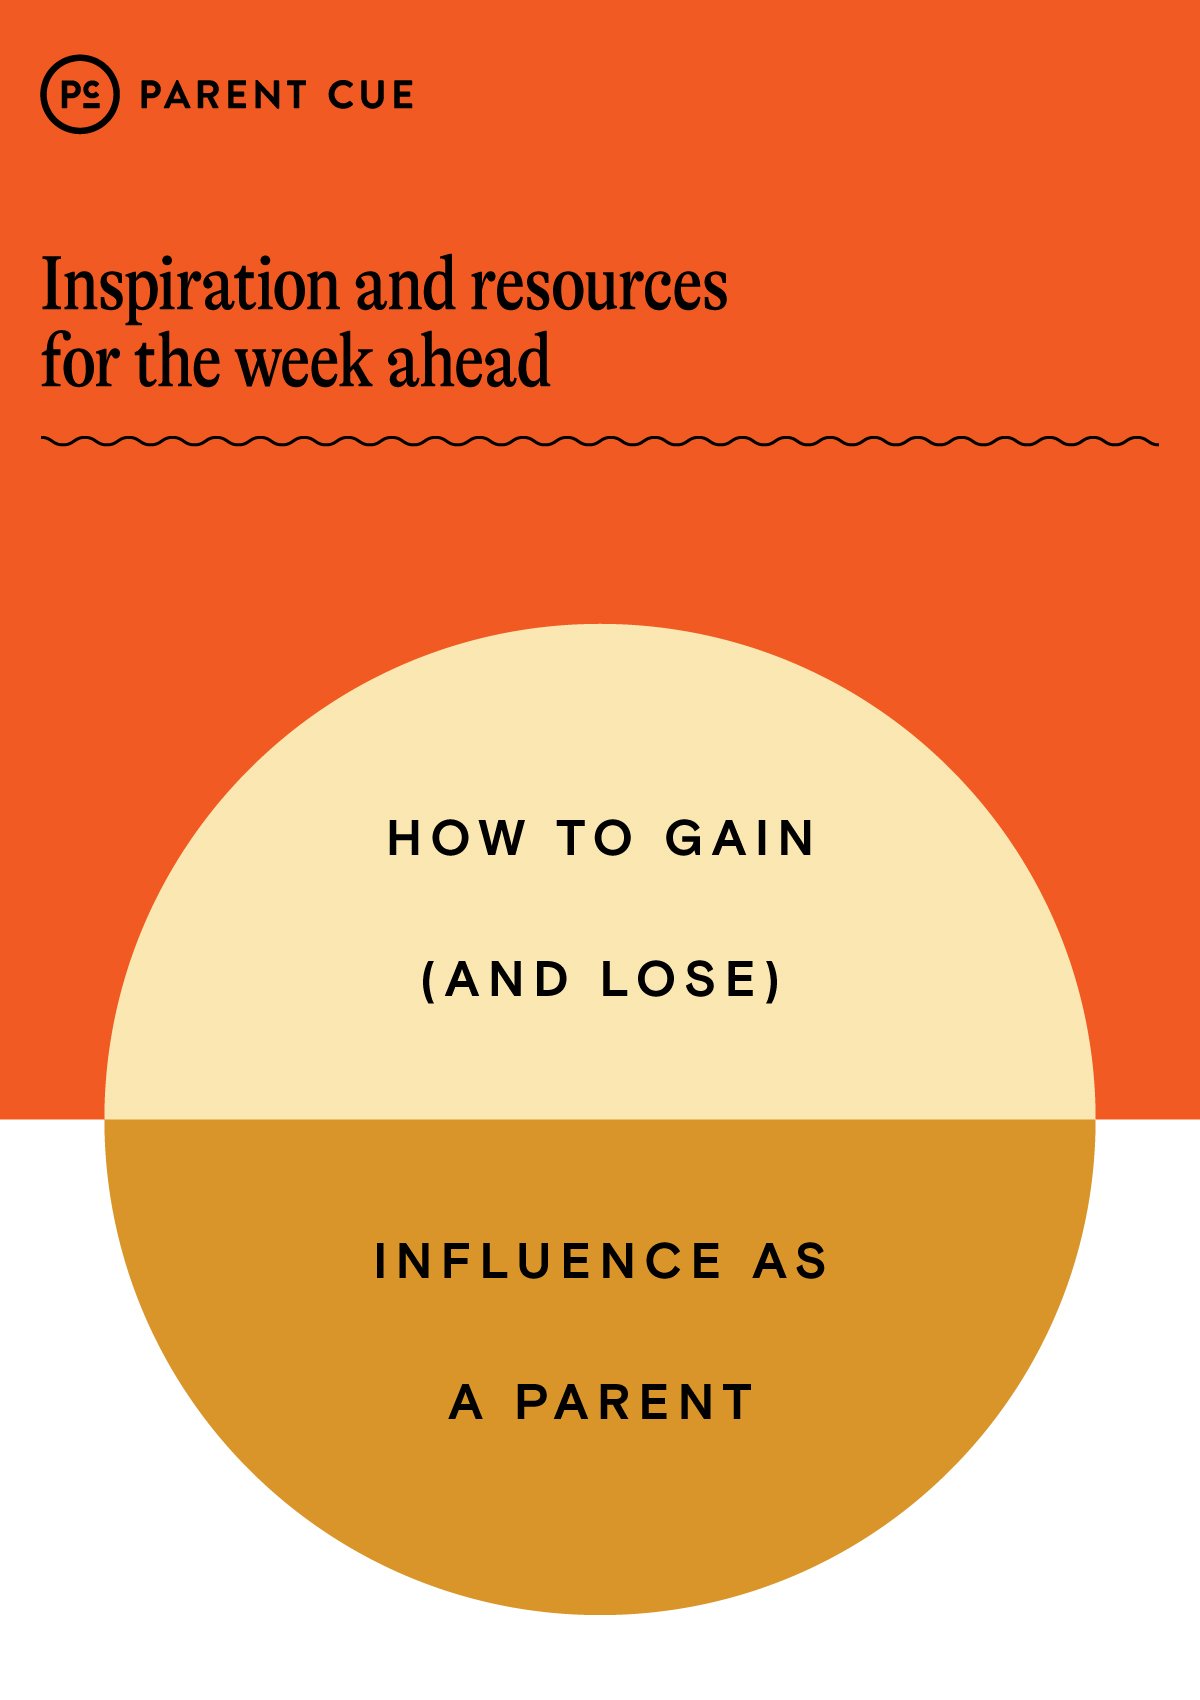 How to Gain (and Lose) Influence as a Parent